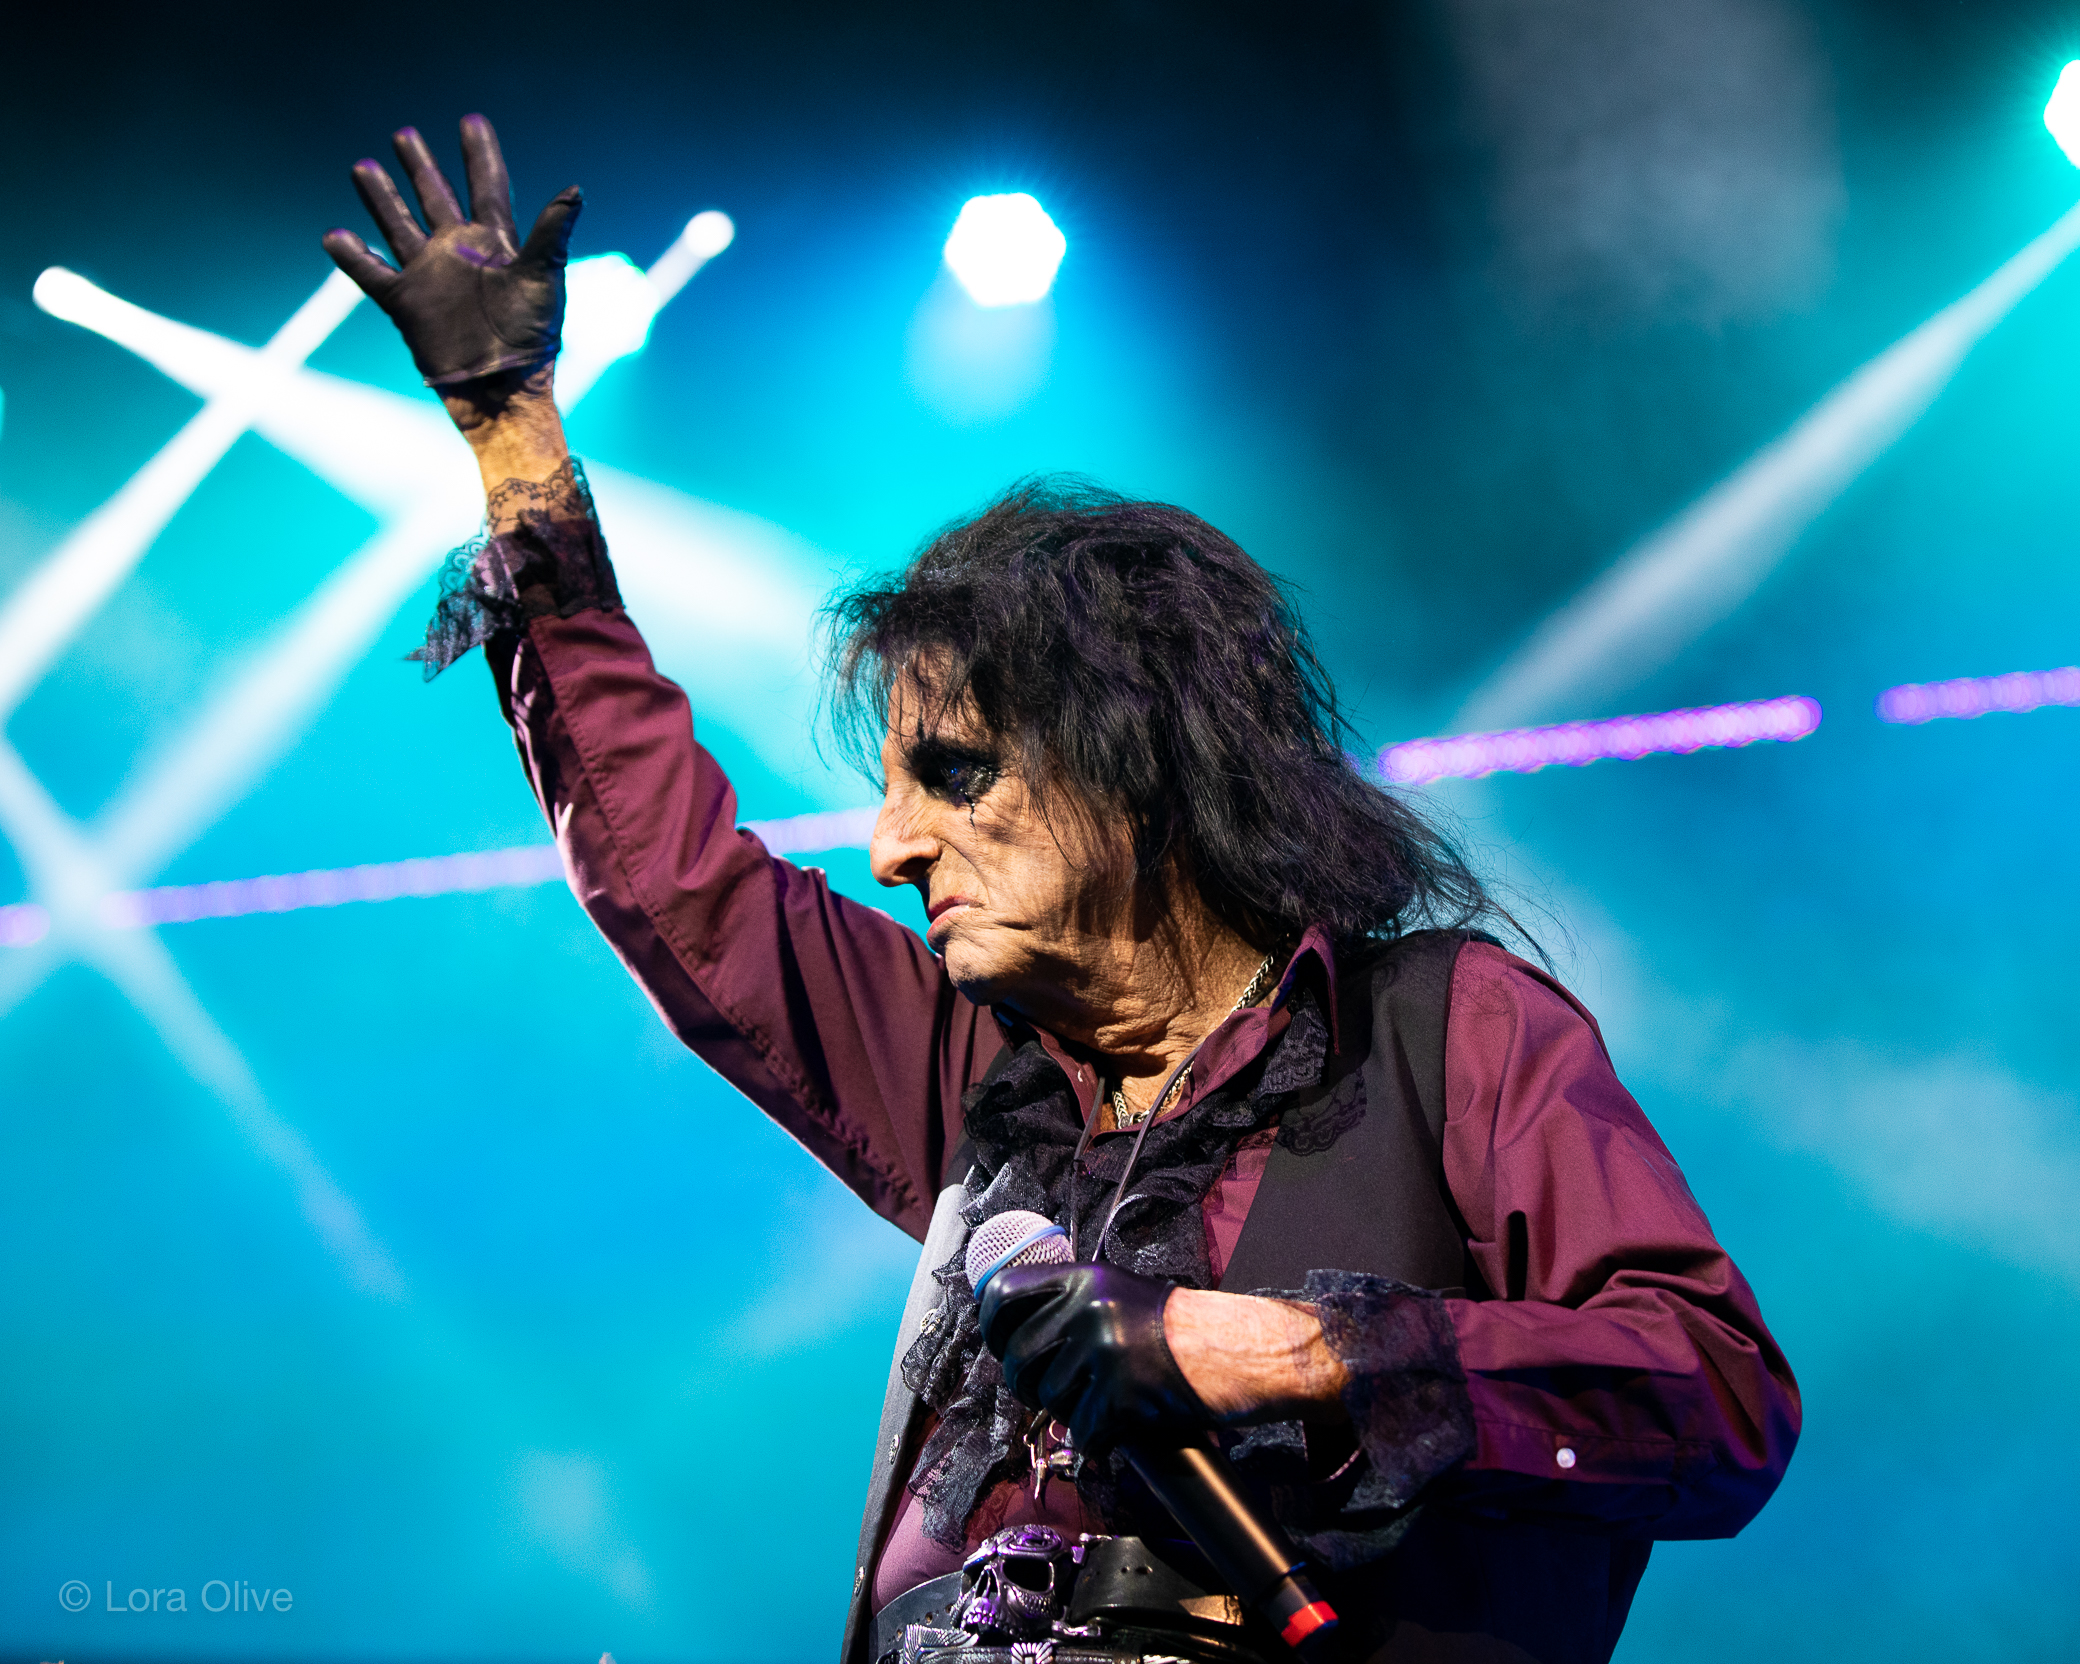 Alice Cooper brings 'Detroit Stories' tour to Indy